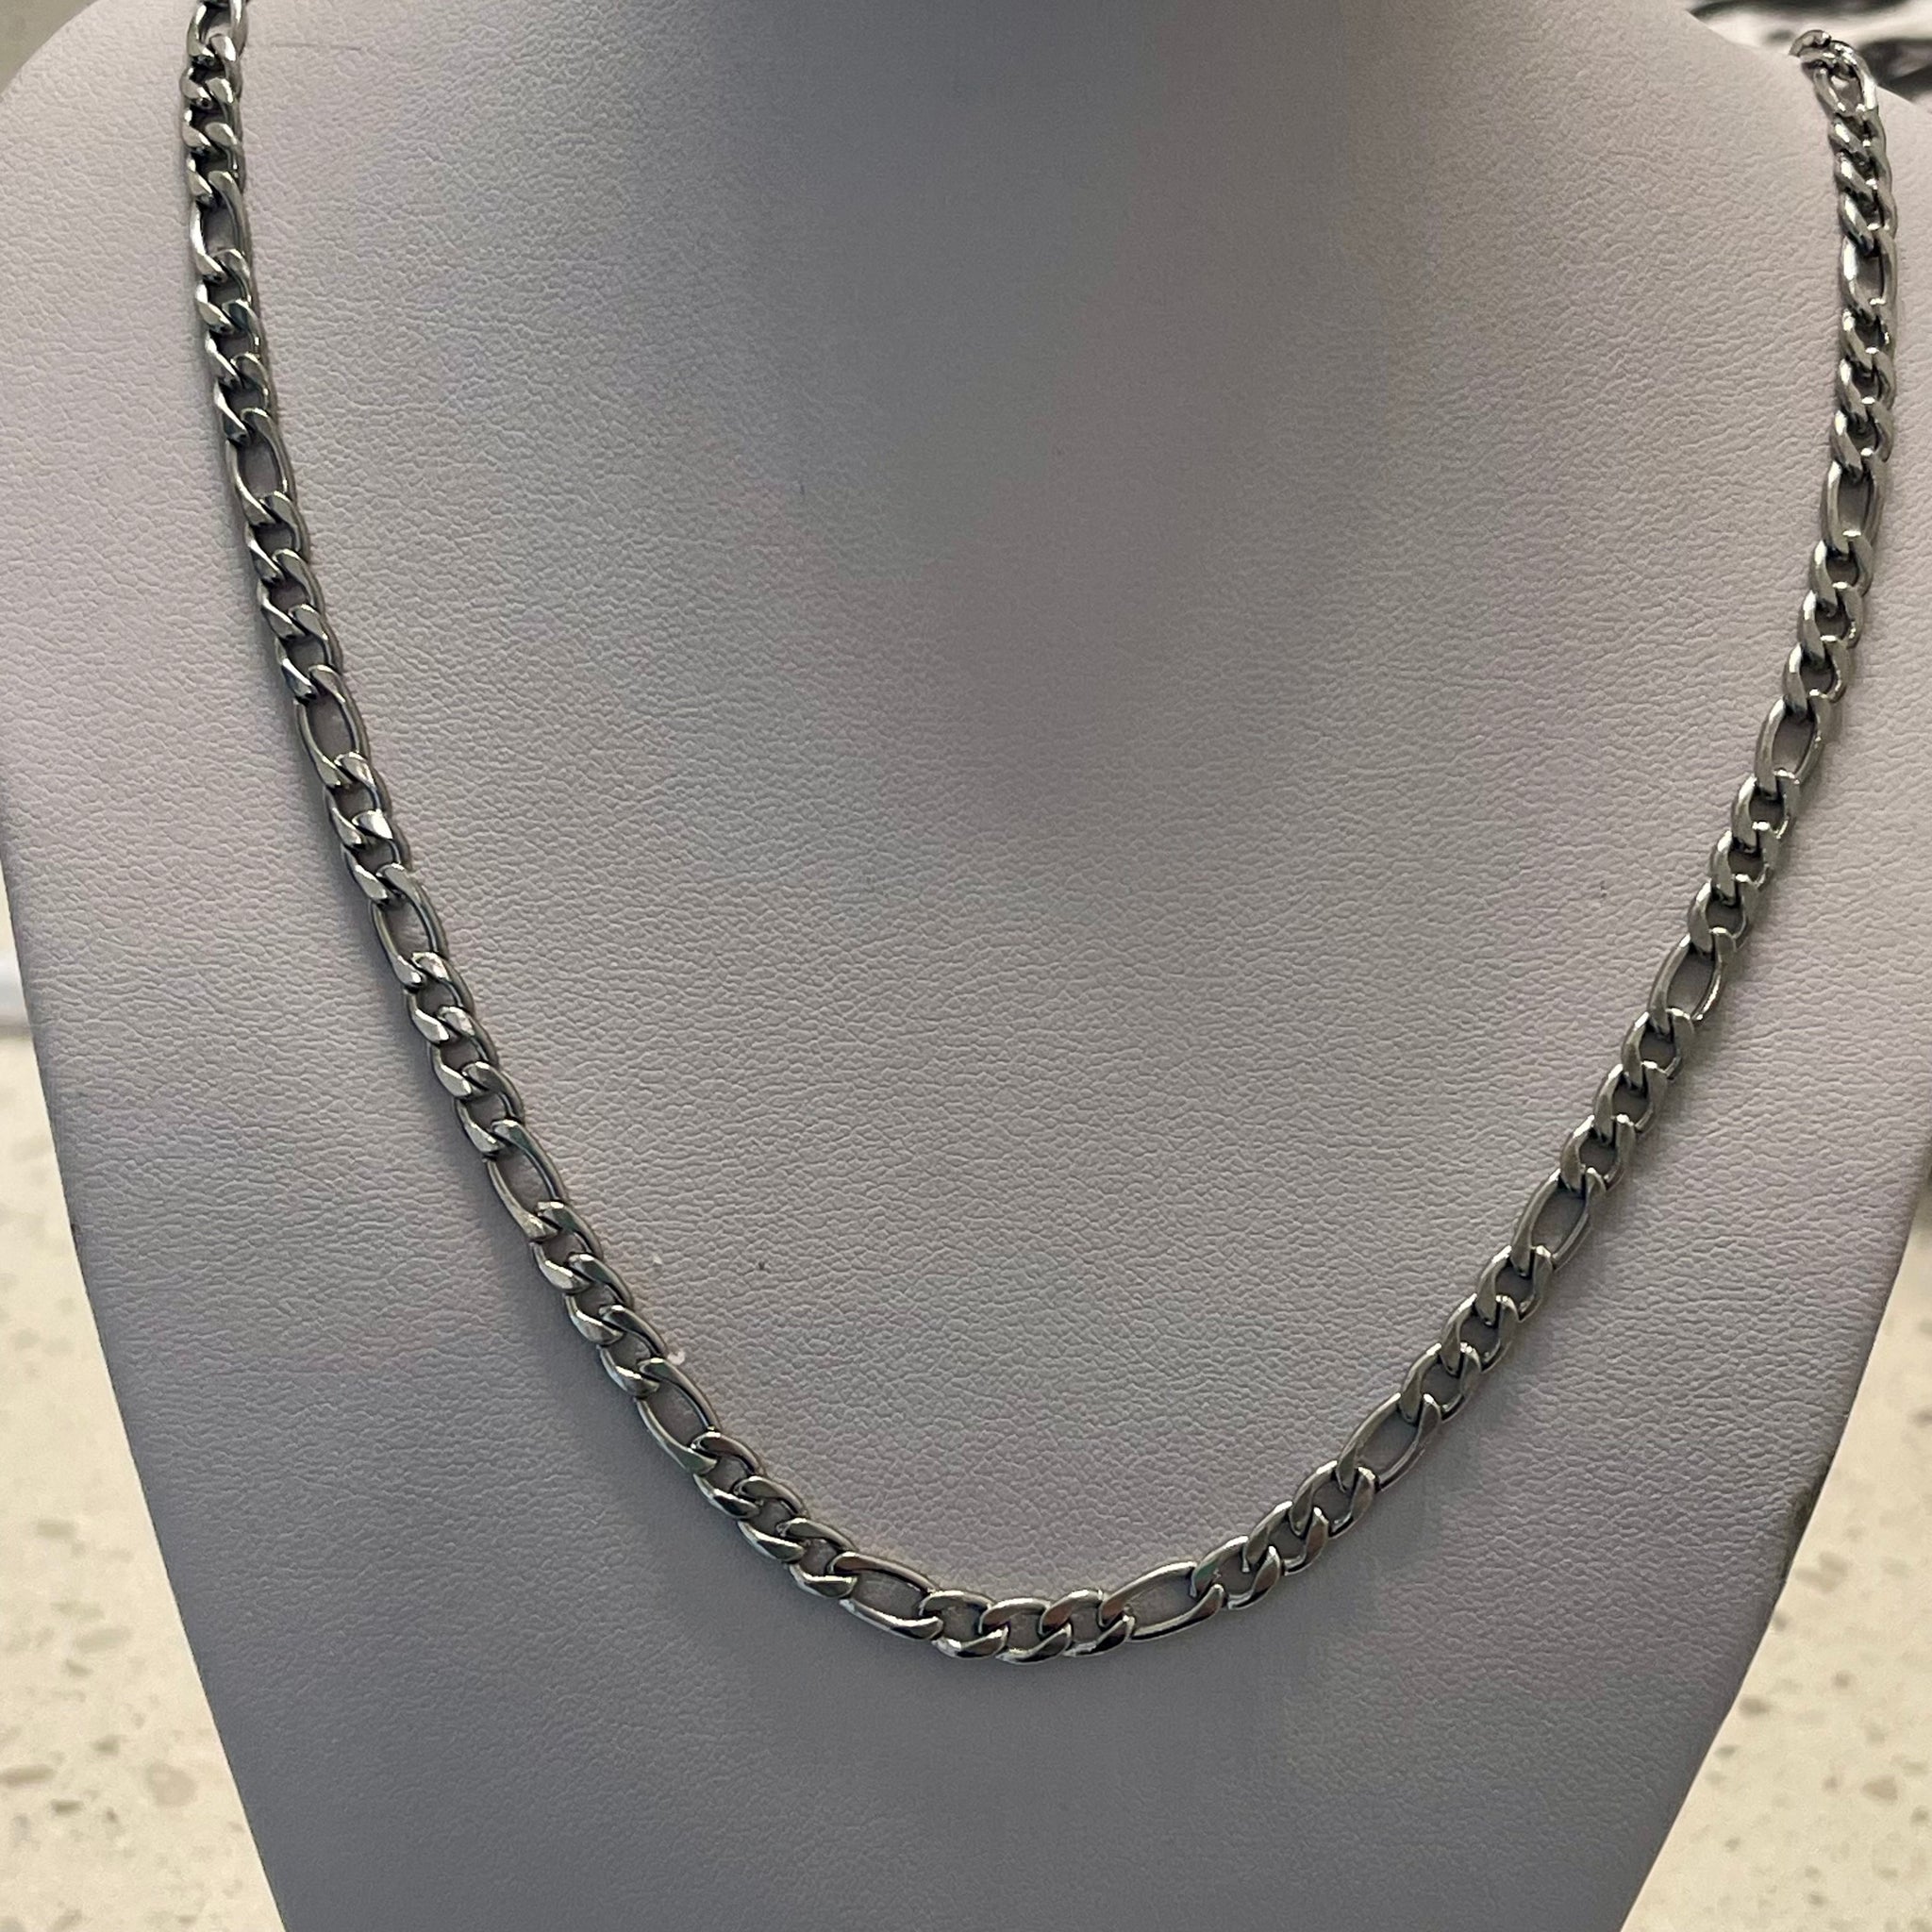 3 + 1 Fígaro Silver Chain Unisex Vintage 4mm Wide Link Jewelry 24” Silver Tone